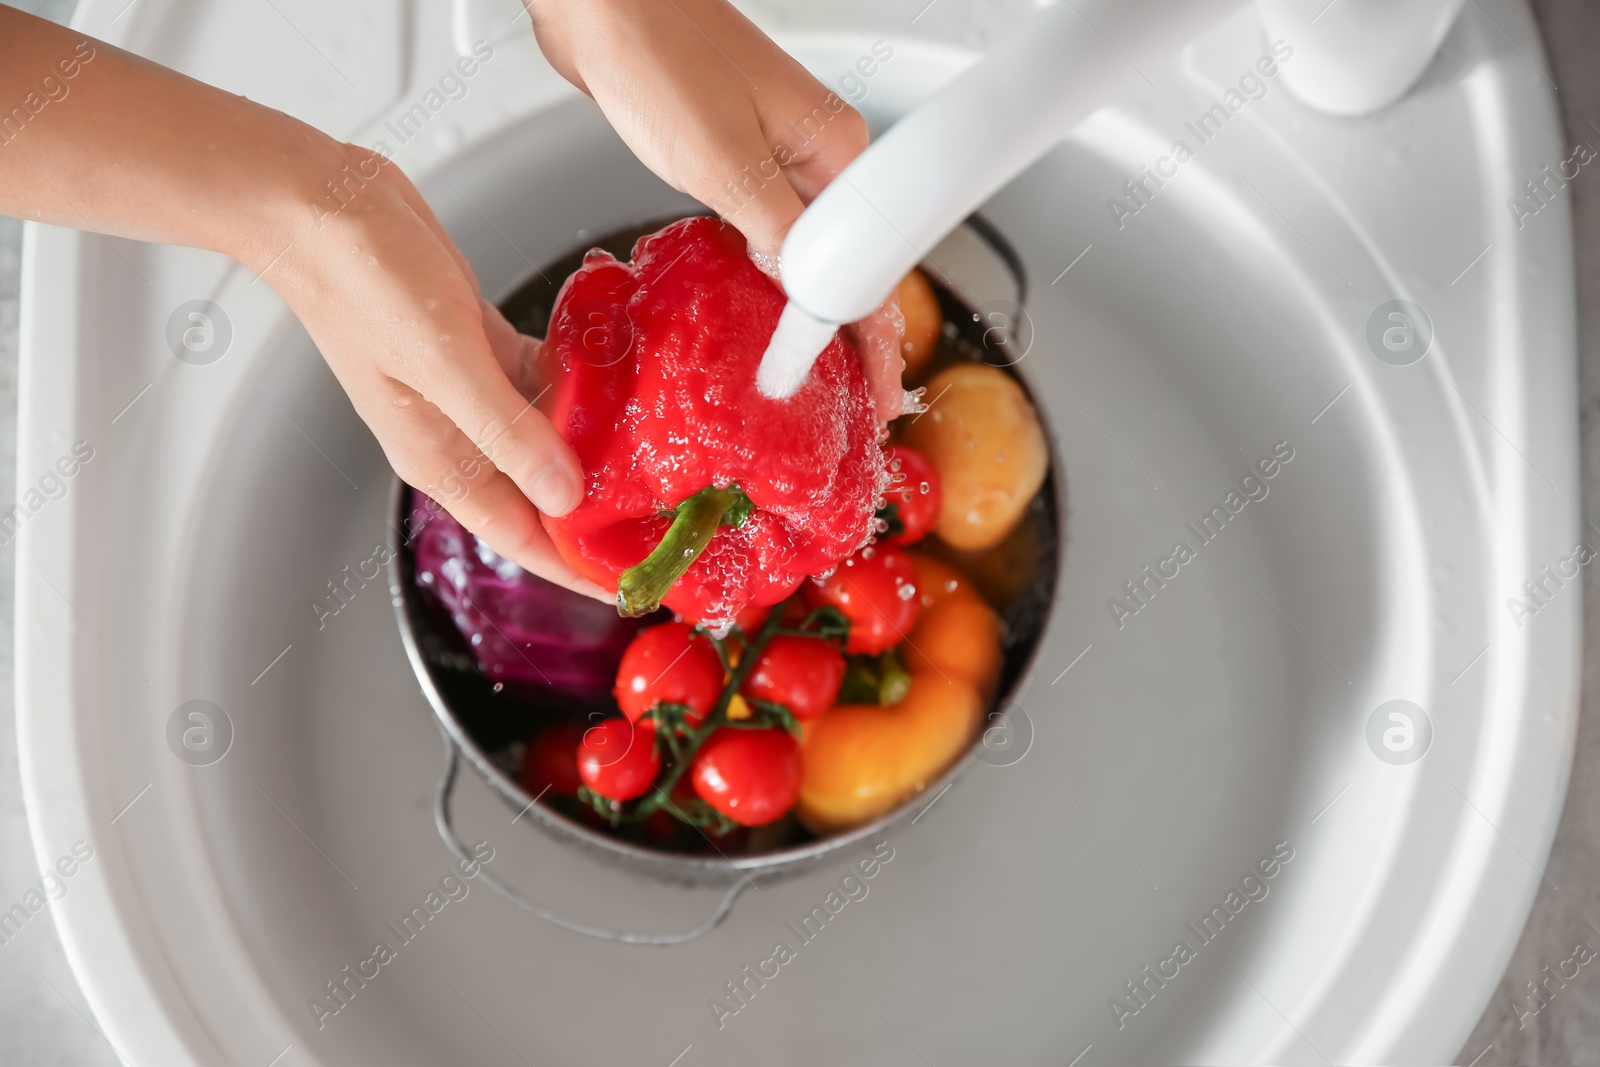 Photo of Woman washing fresh vegetables in kitchen sink, top view